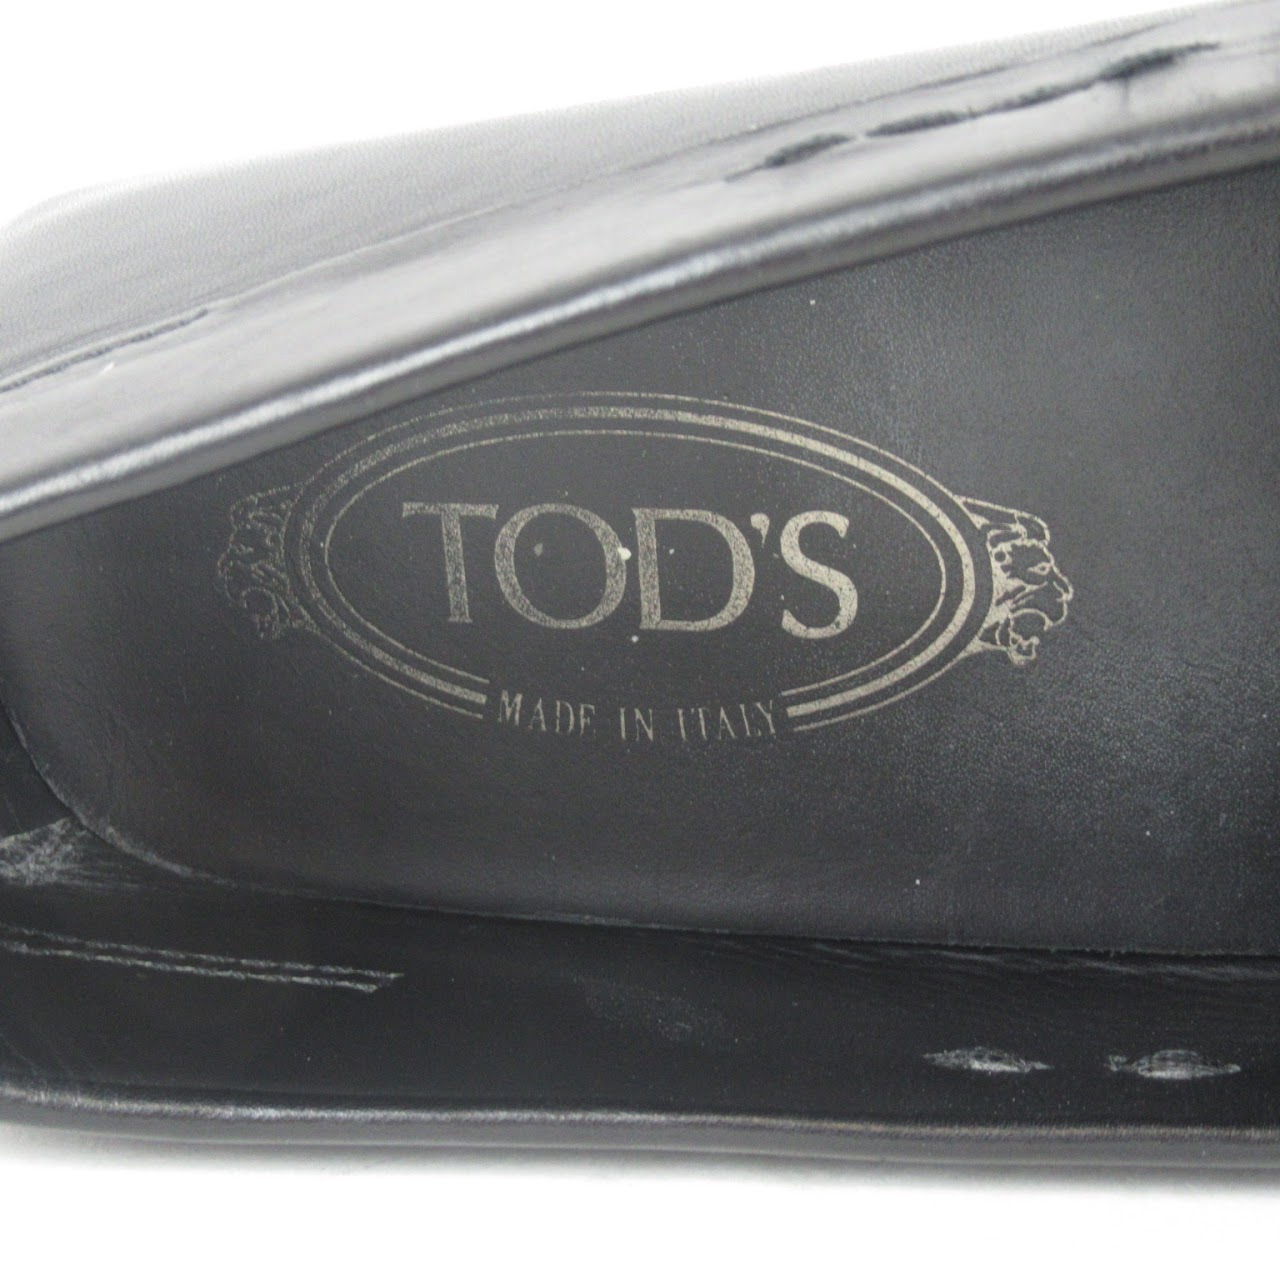 Tod's Black Leather Driving Mocs